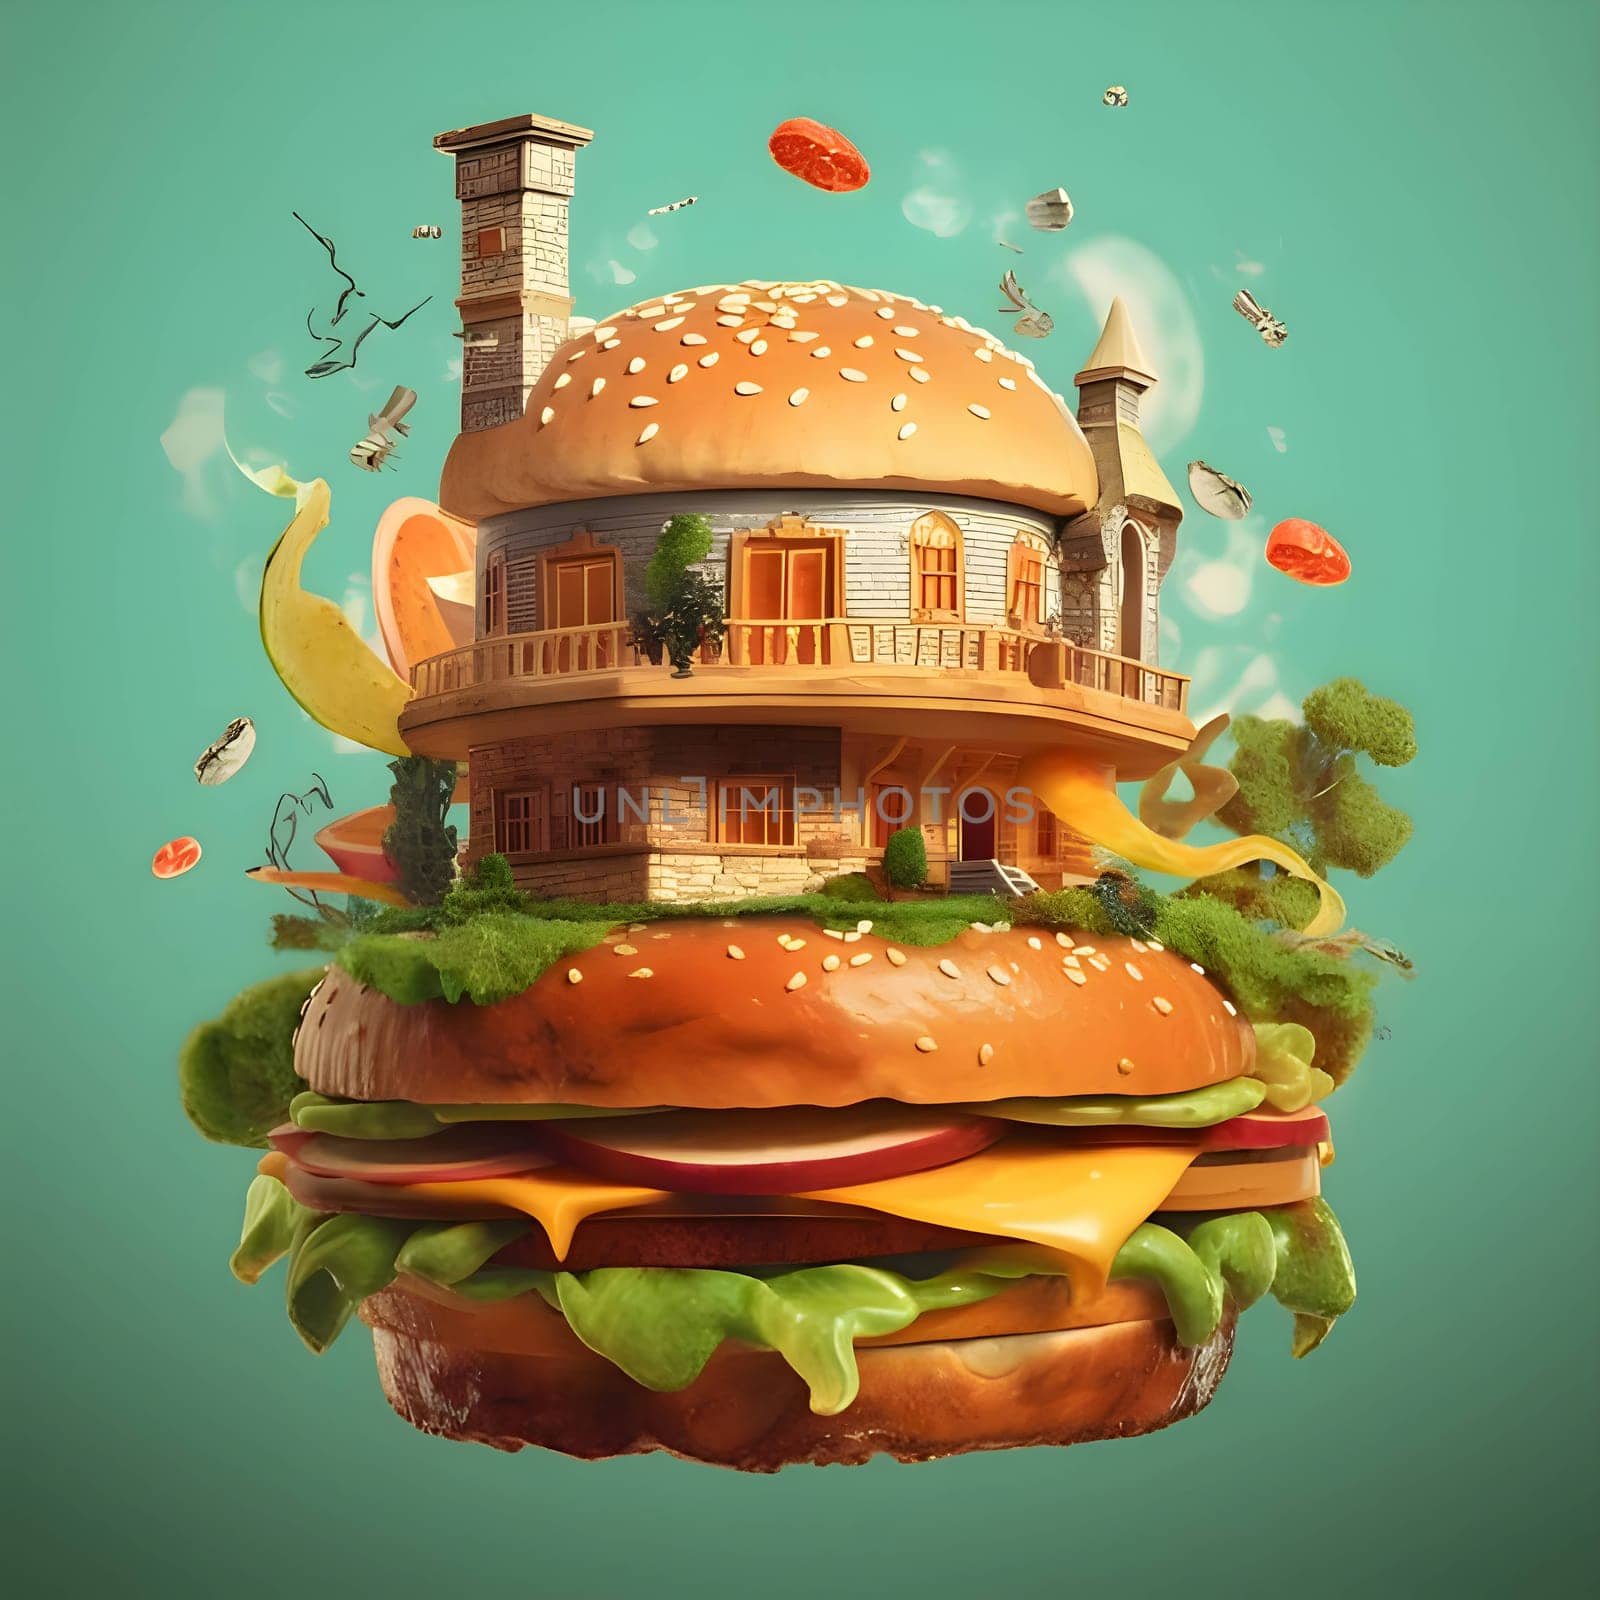 Illustration of a hamburger as a house by ThemesS